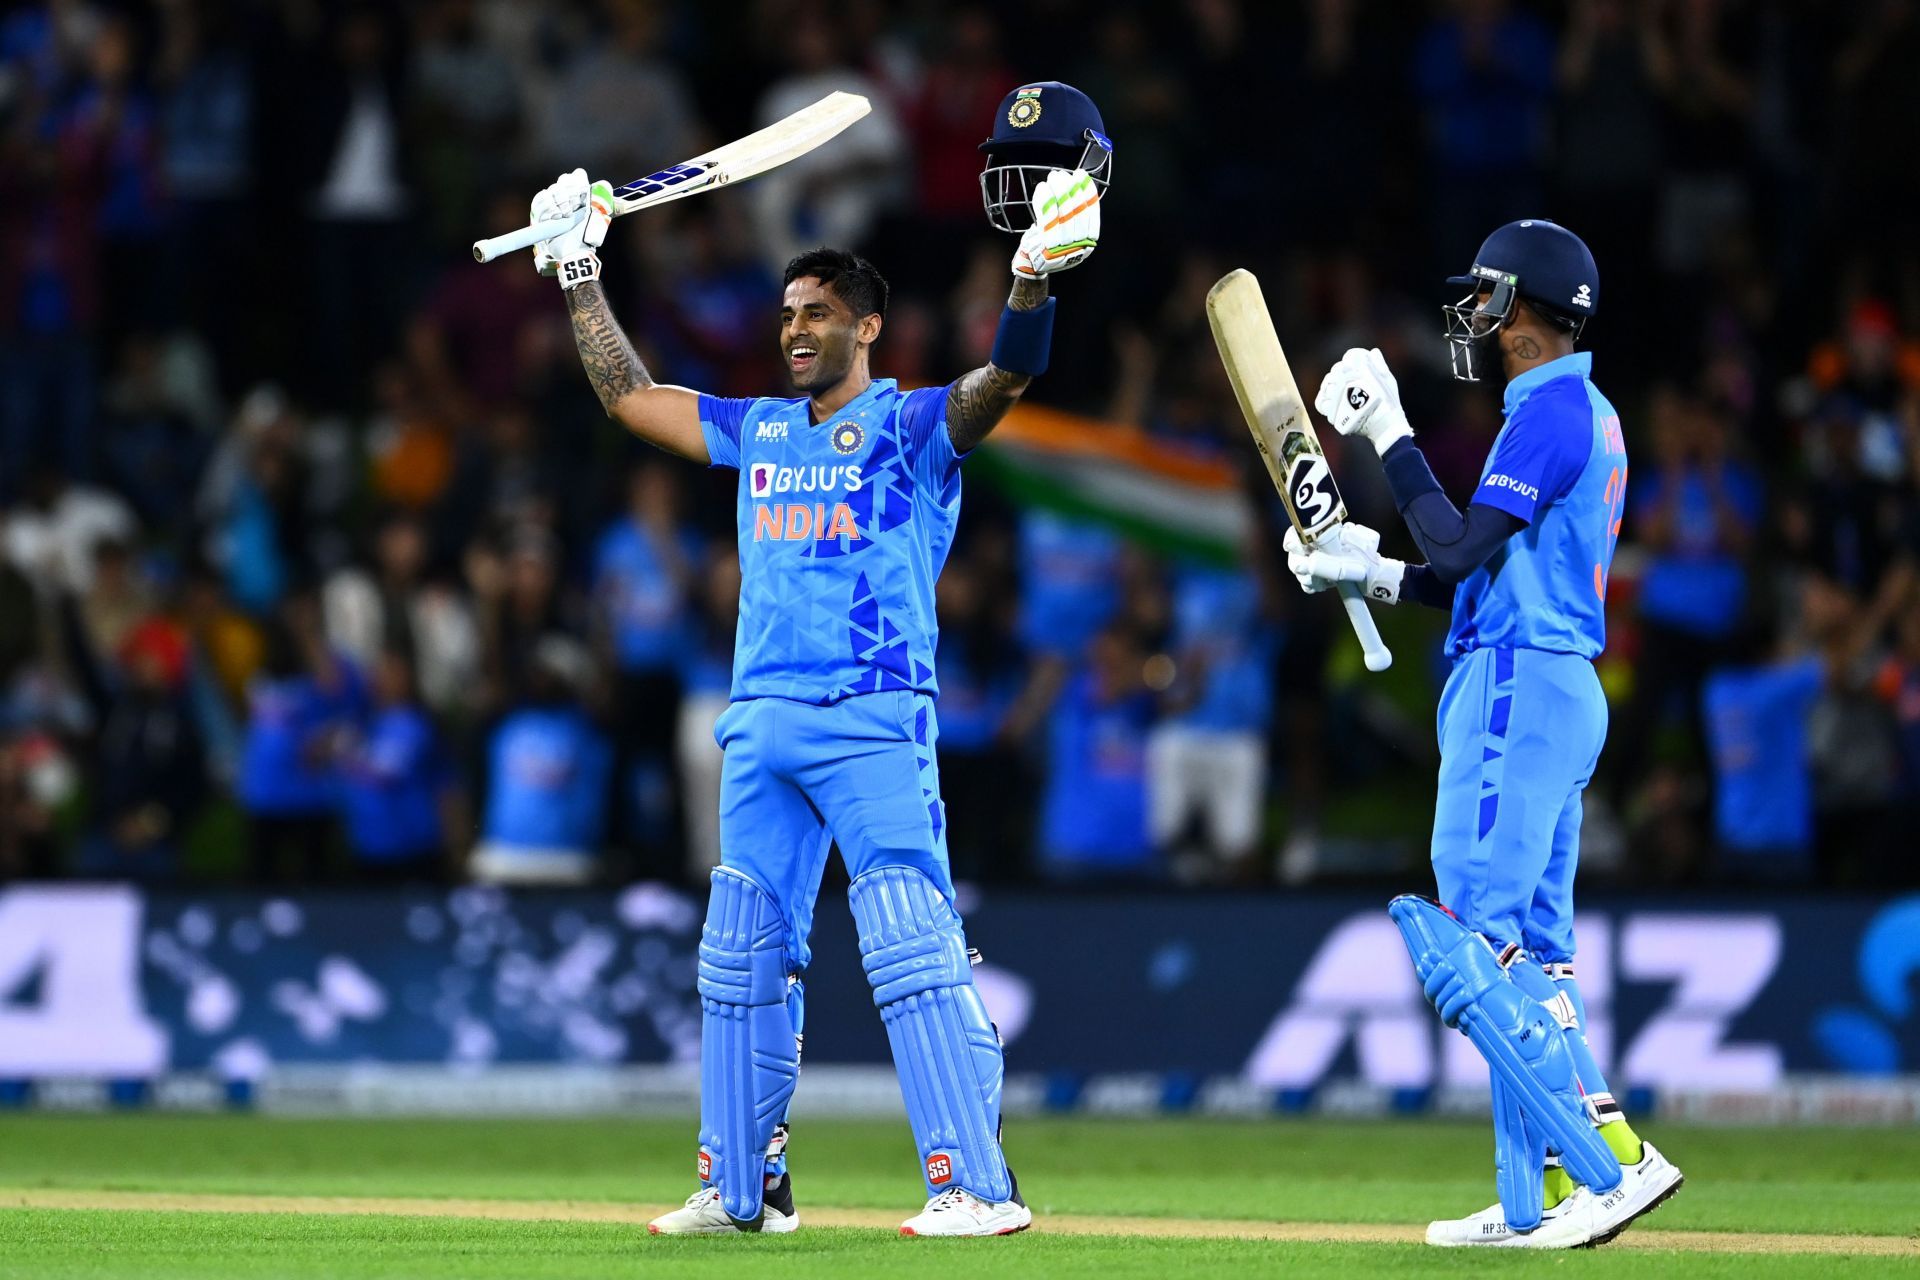 New Zealand v India - 2nd T20 (Image: Getty)